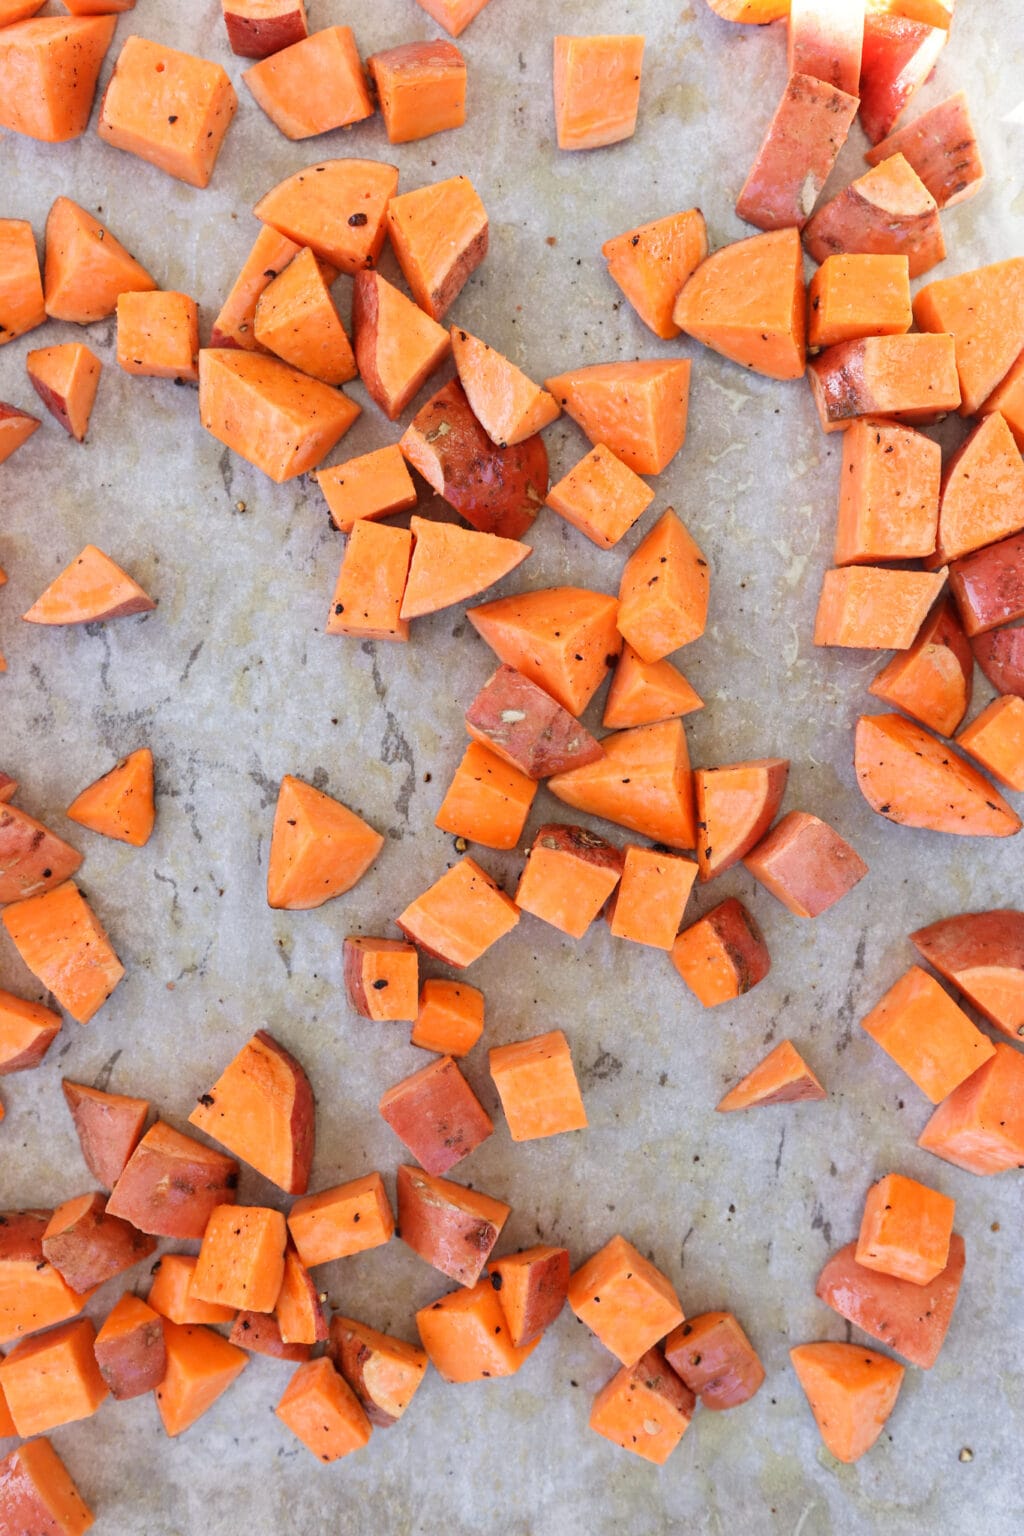 Meal prep roasted sweet potatoes uncooked on a baking sheet